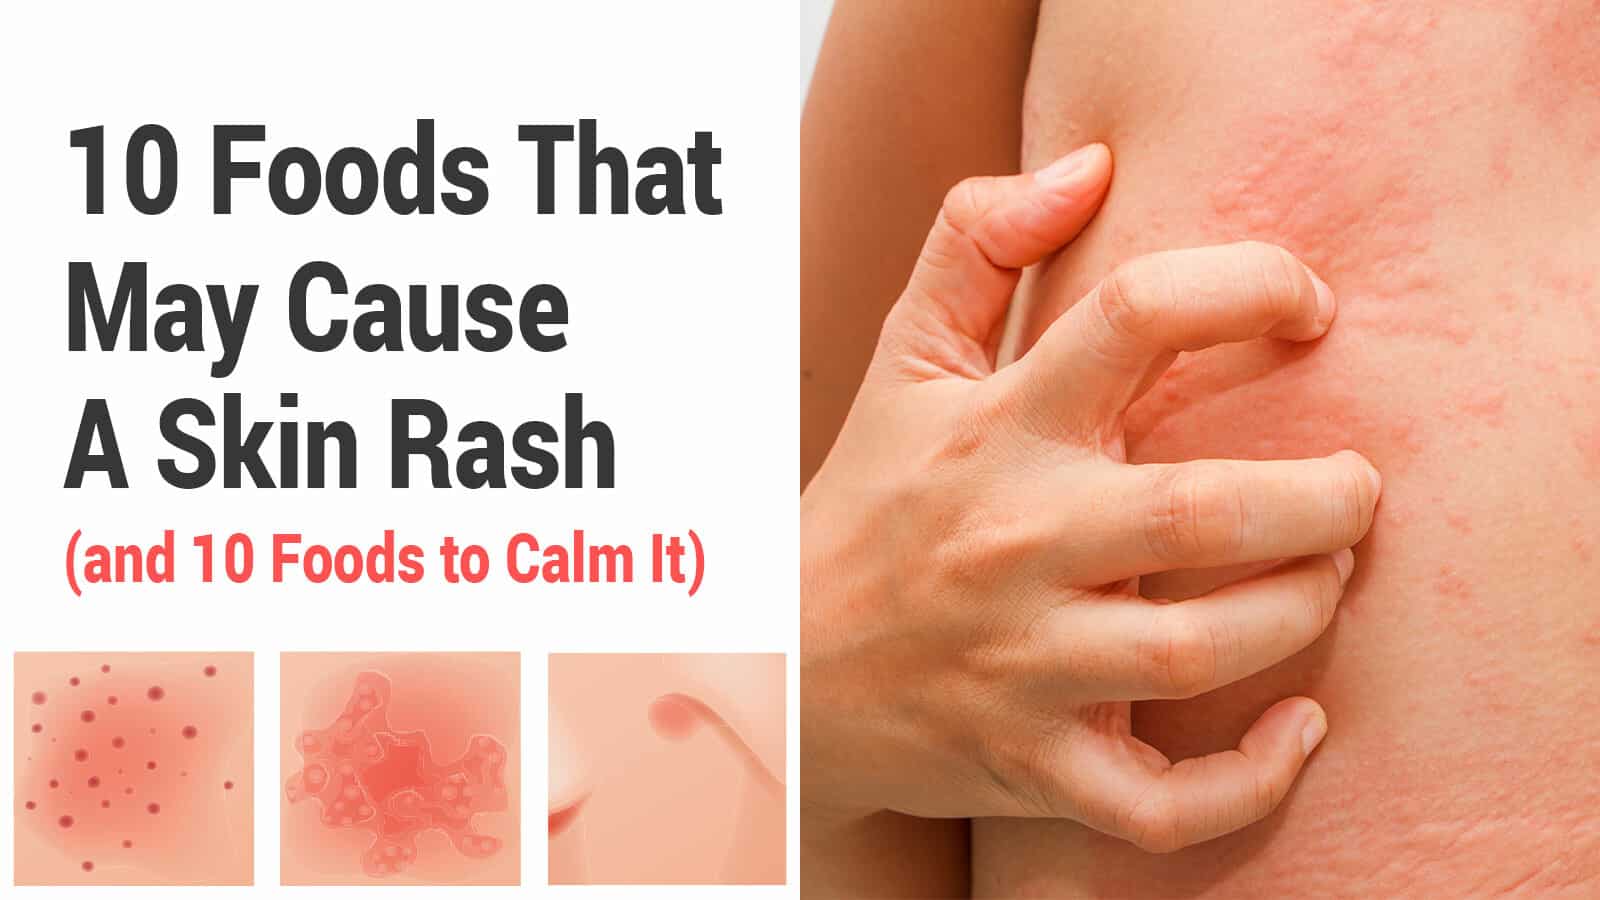 10 Foods That May Cause A Skin Rash (and 10 Foods to Calm It)